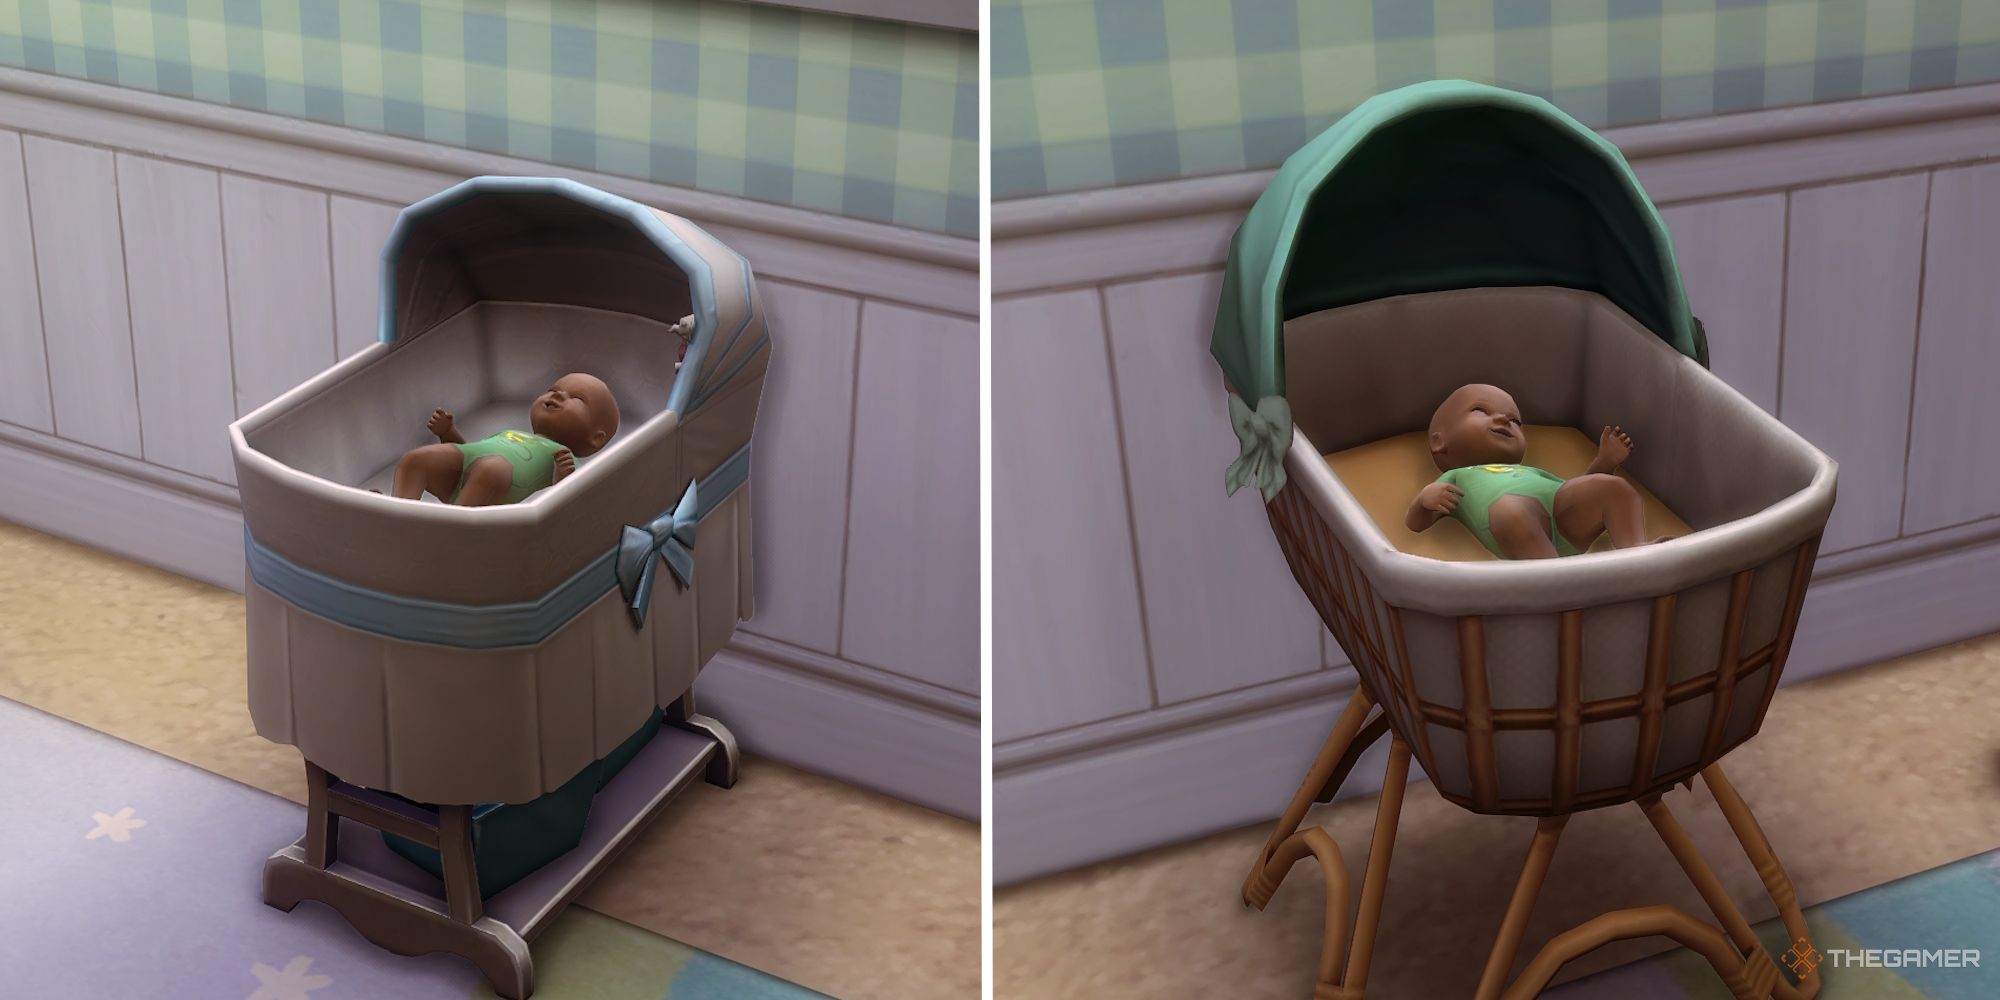 A Sims 4 newborn moved to a new crib